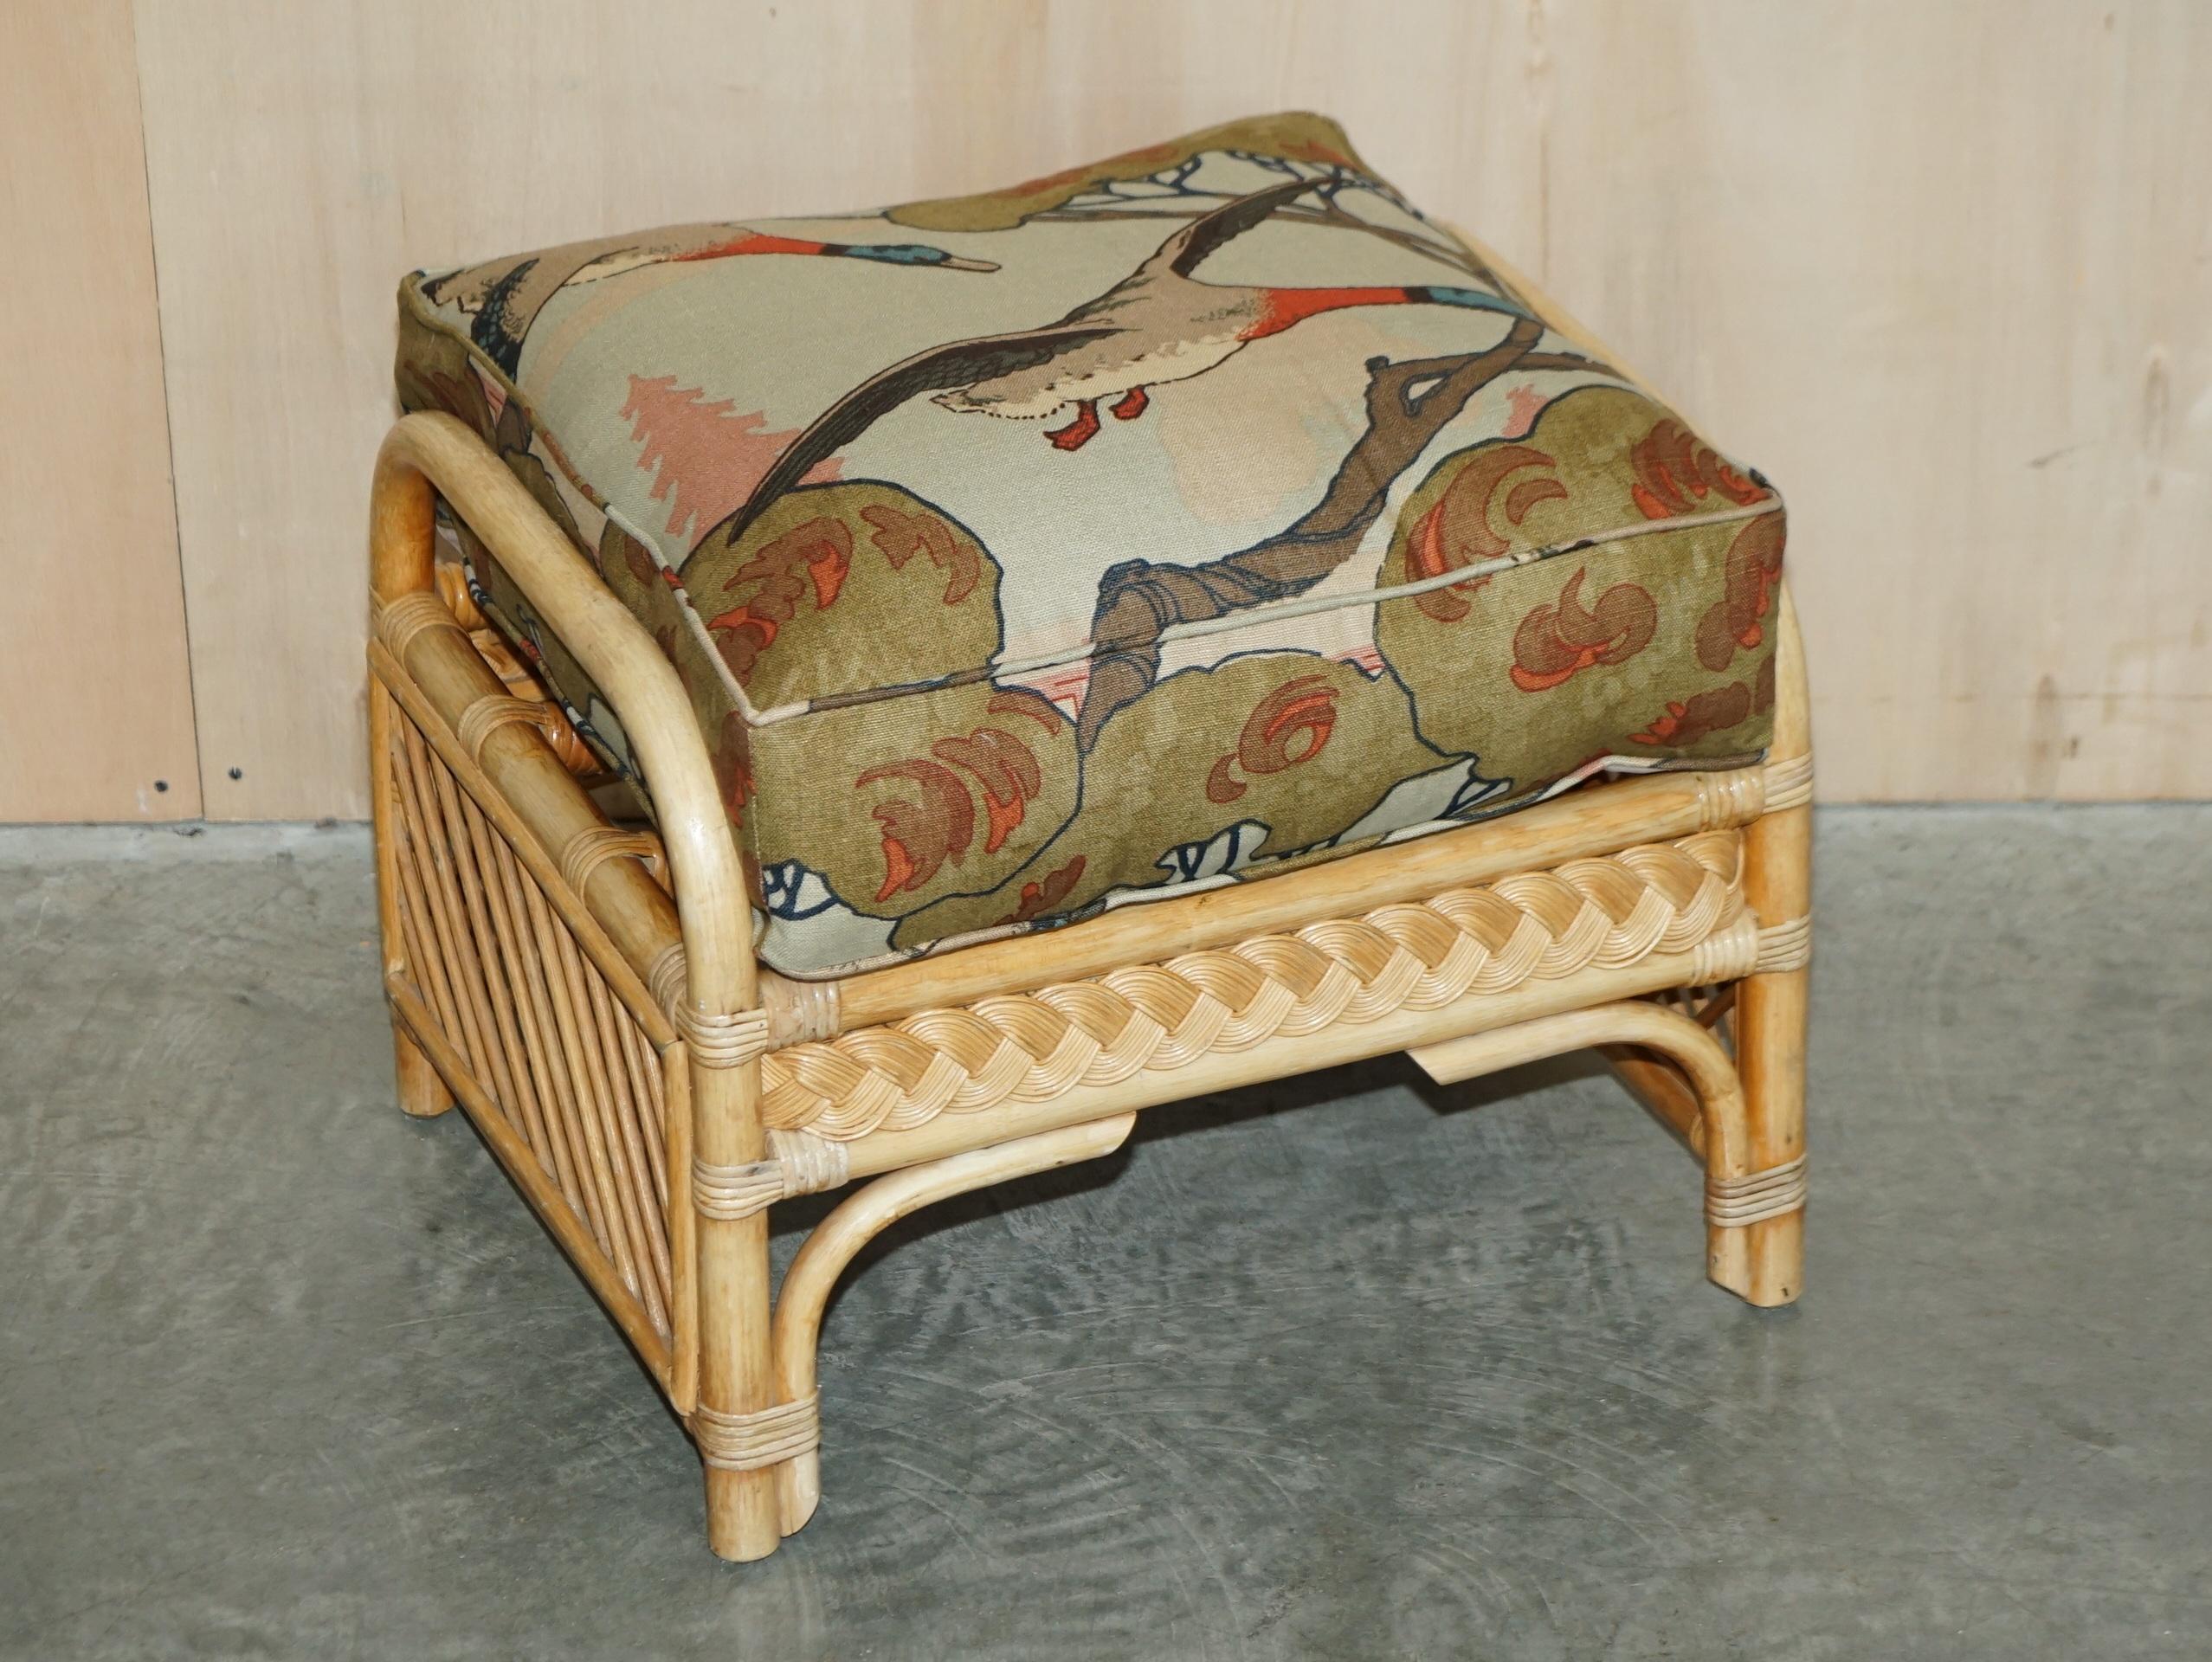 WICKER ARMCHAIRS STOOL TABLE SUITE UPHOLSTERED WiTH MULBERRY FLYING DUCKS FABRIC For Sale 9